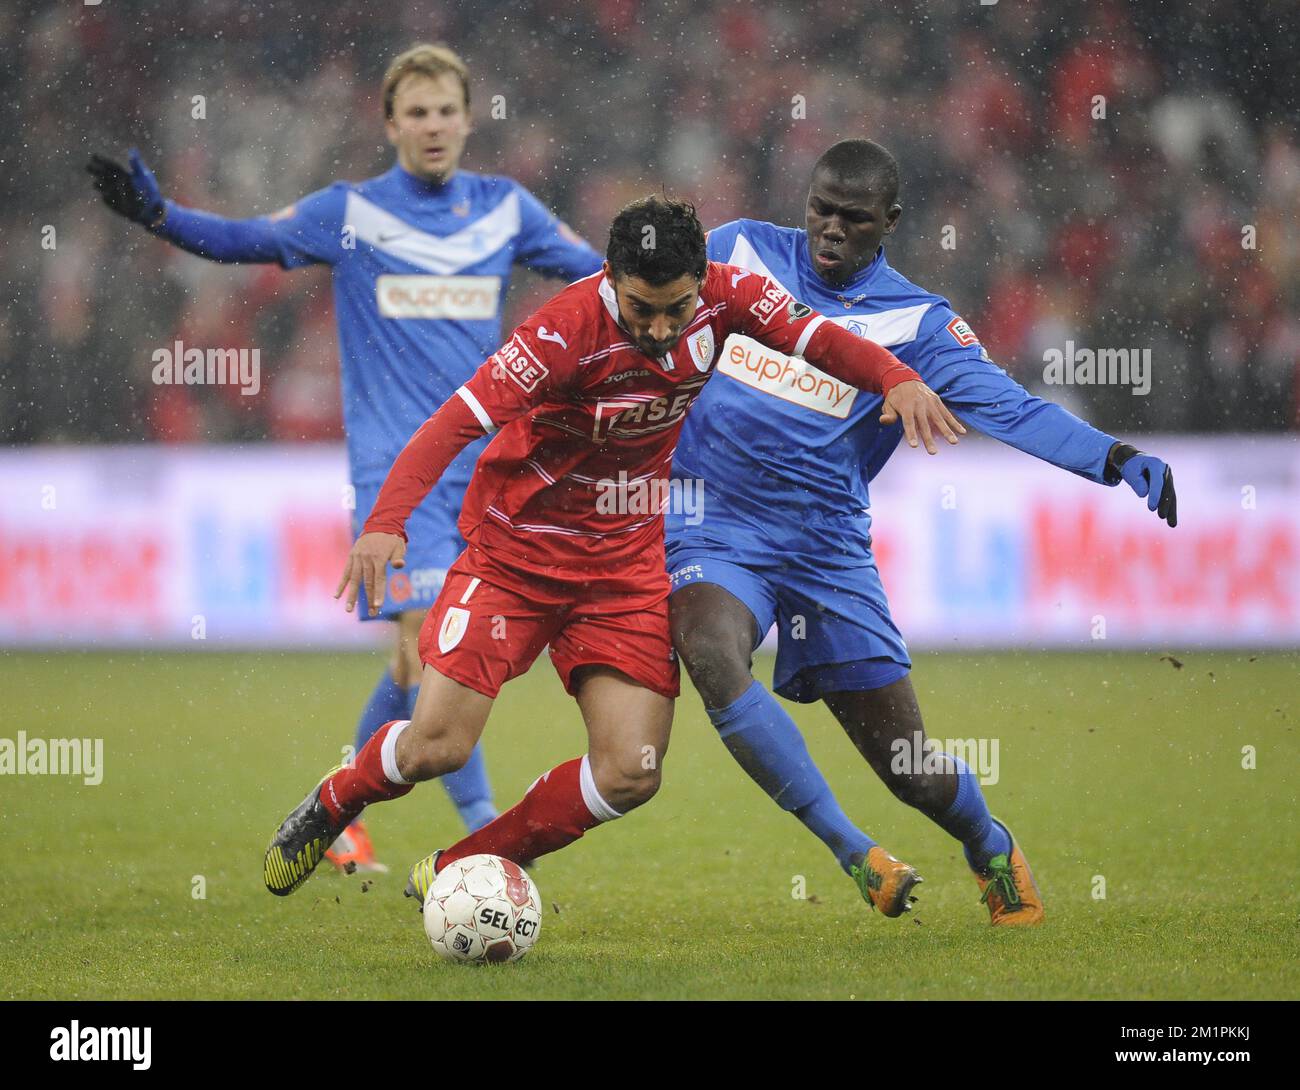 Standard's Reza Ghoochannejhad and Genk's Kara Mbodj fight for the ball during the Jupiler Pro League match between Standard de Liege and RC Genk, in Liege, Sunday 24 February 2013, on day 28 of the Belgian soccer championship. Stock Photo